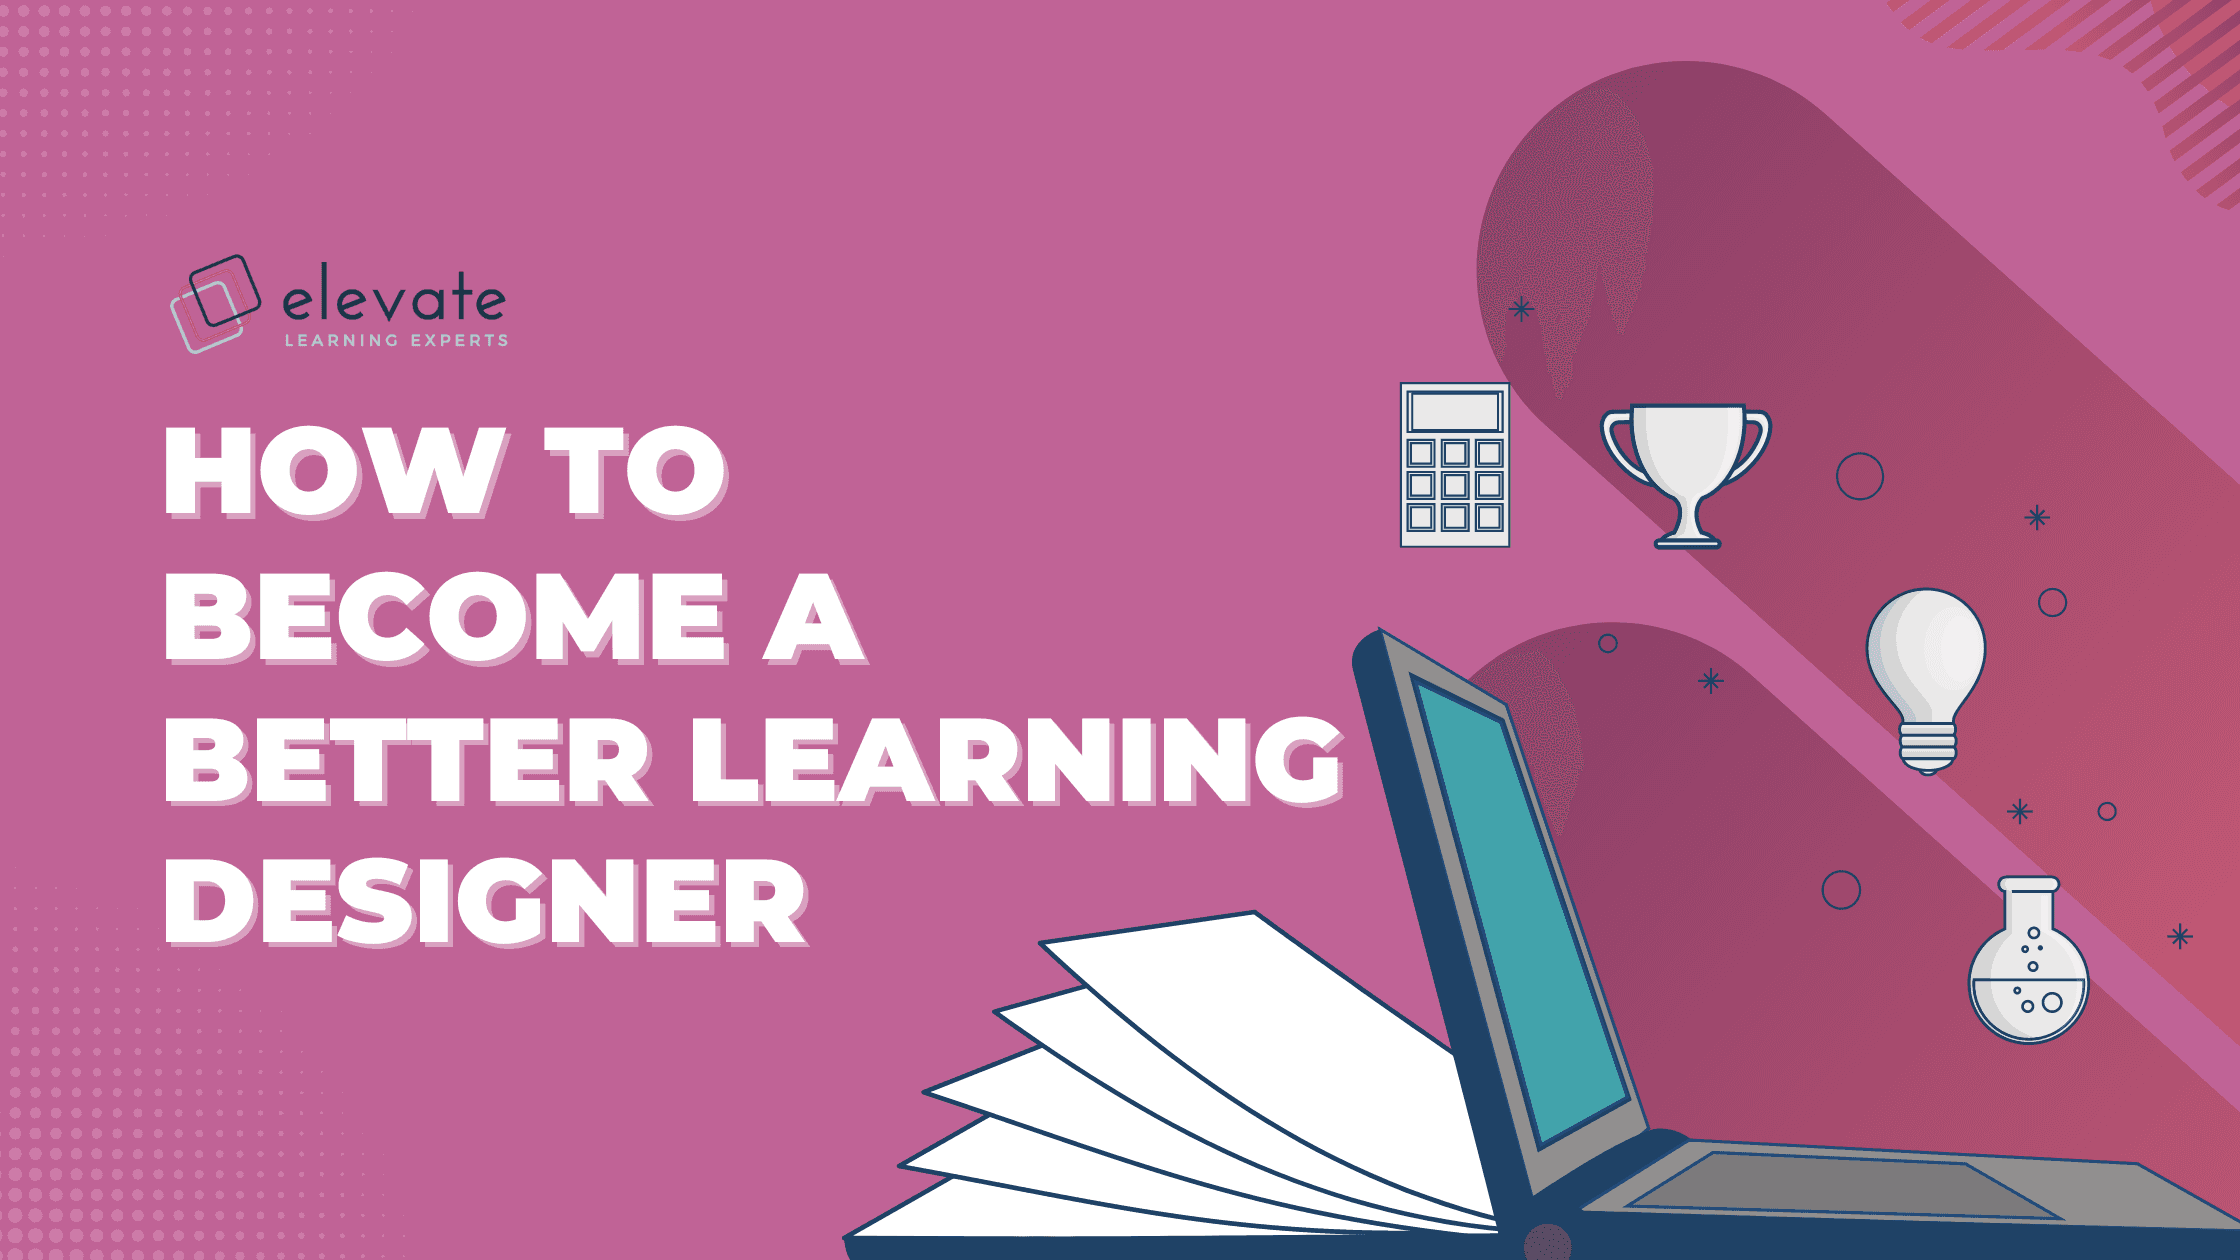 How to Become a Better Learning Designer